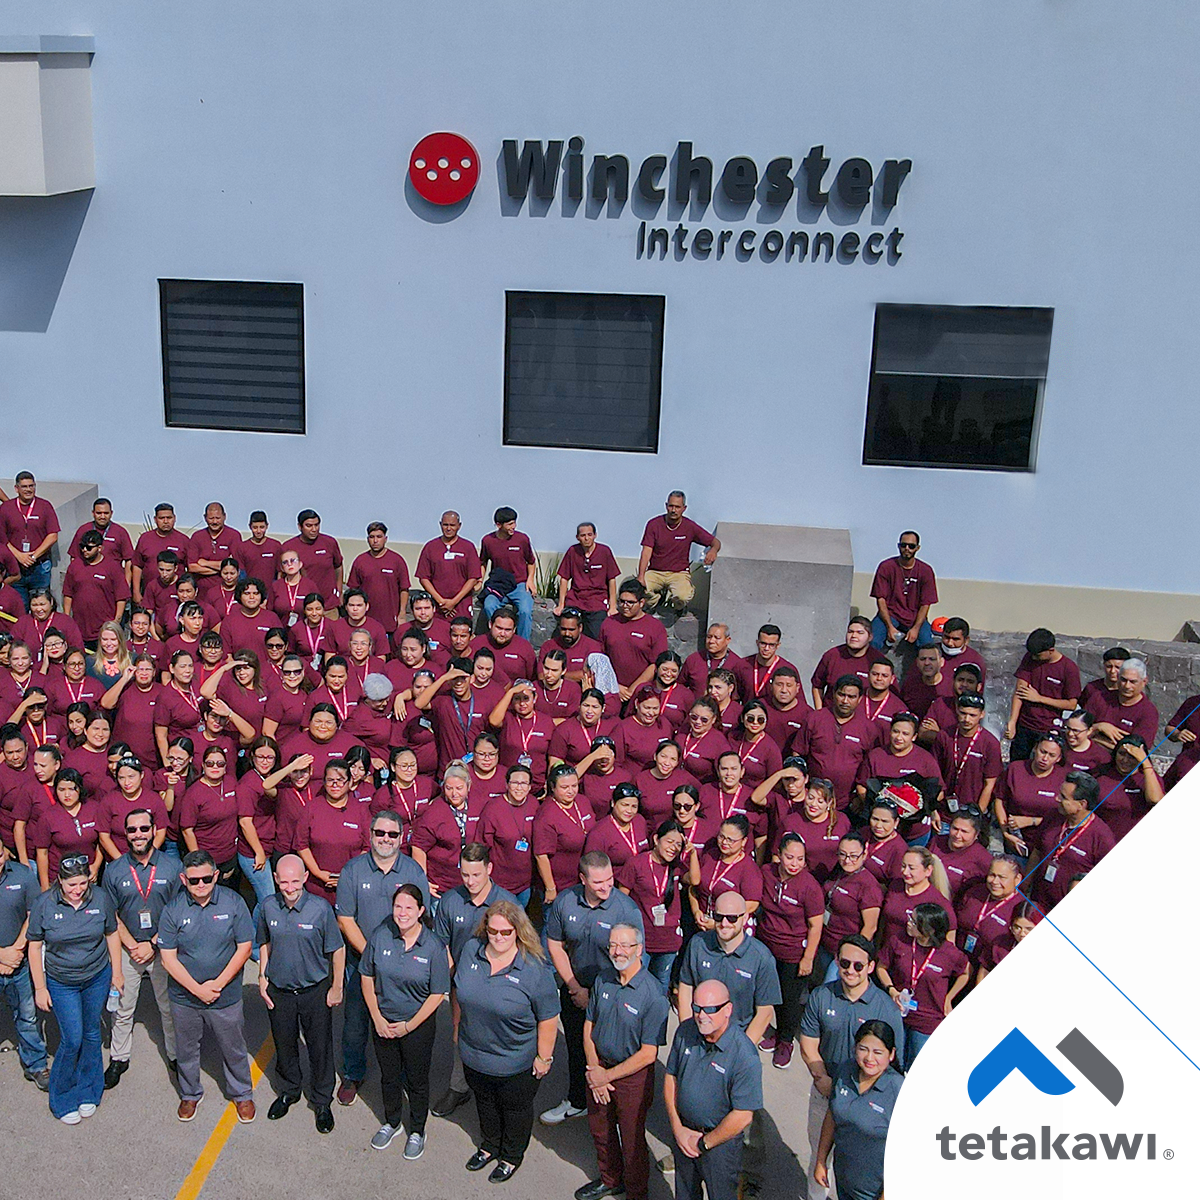 Winchester Interconnect Employees in Empalme, Sonora, Mexico